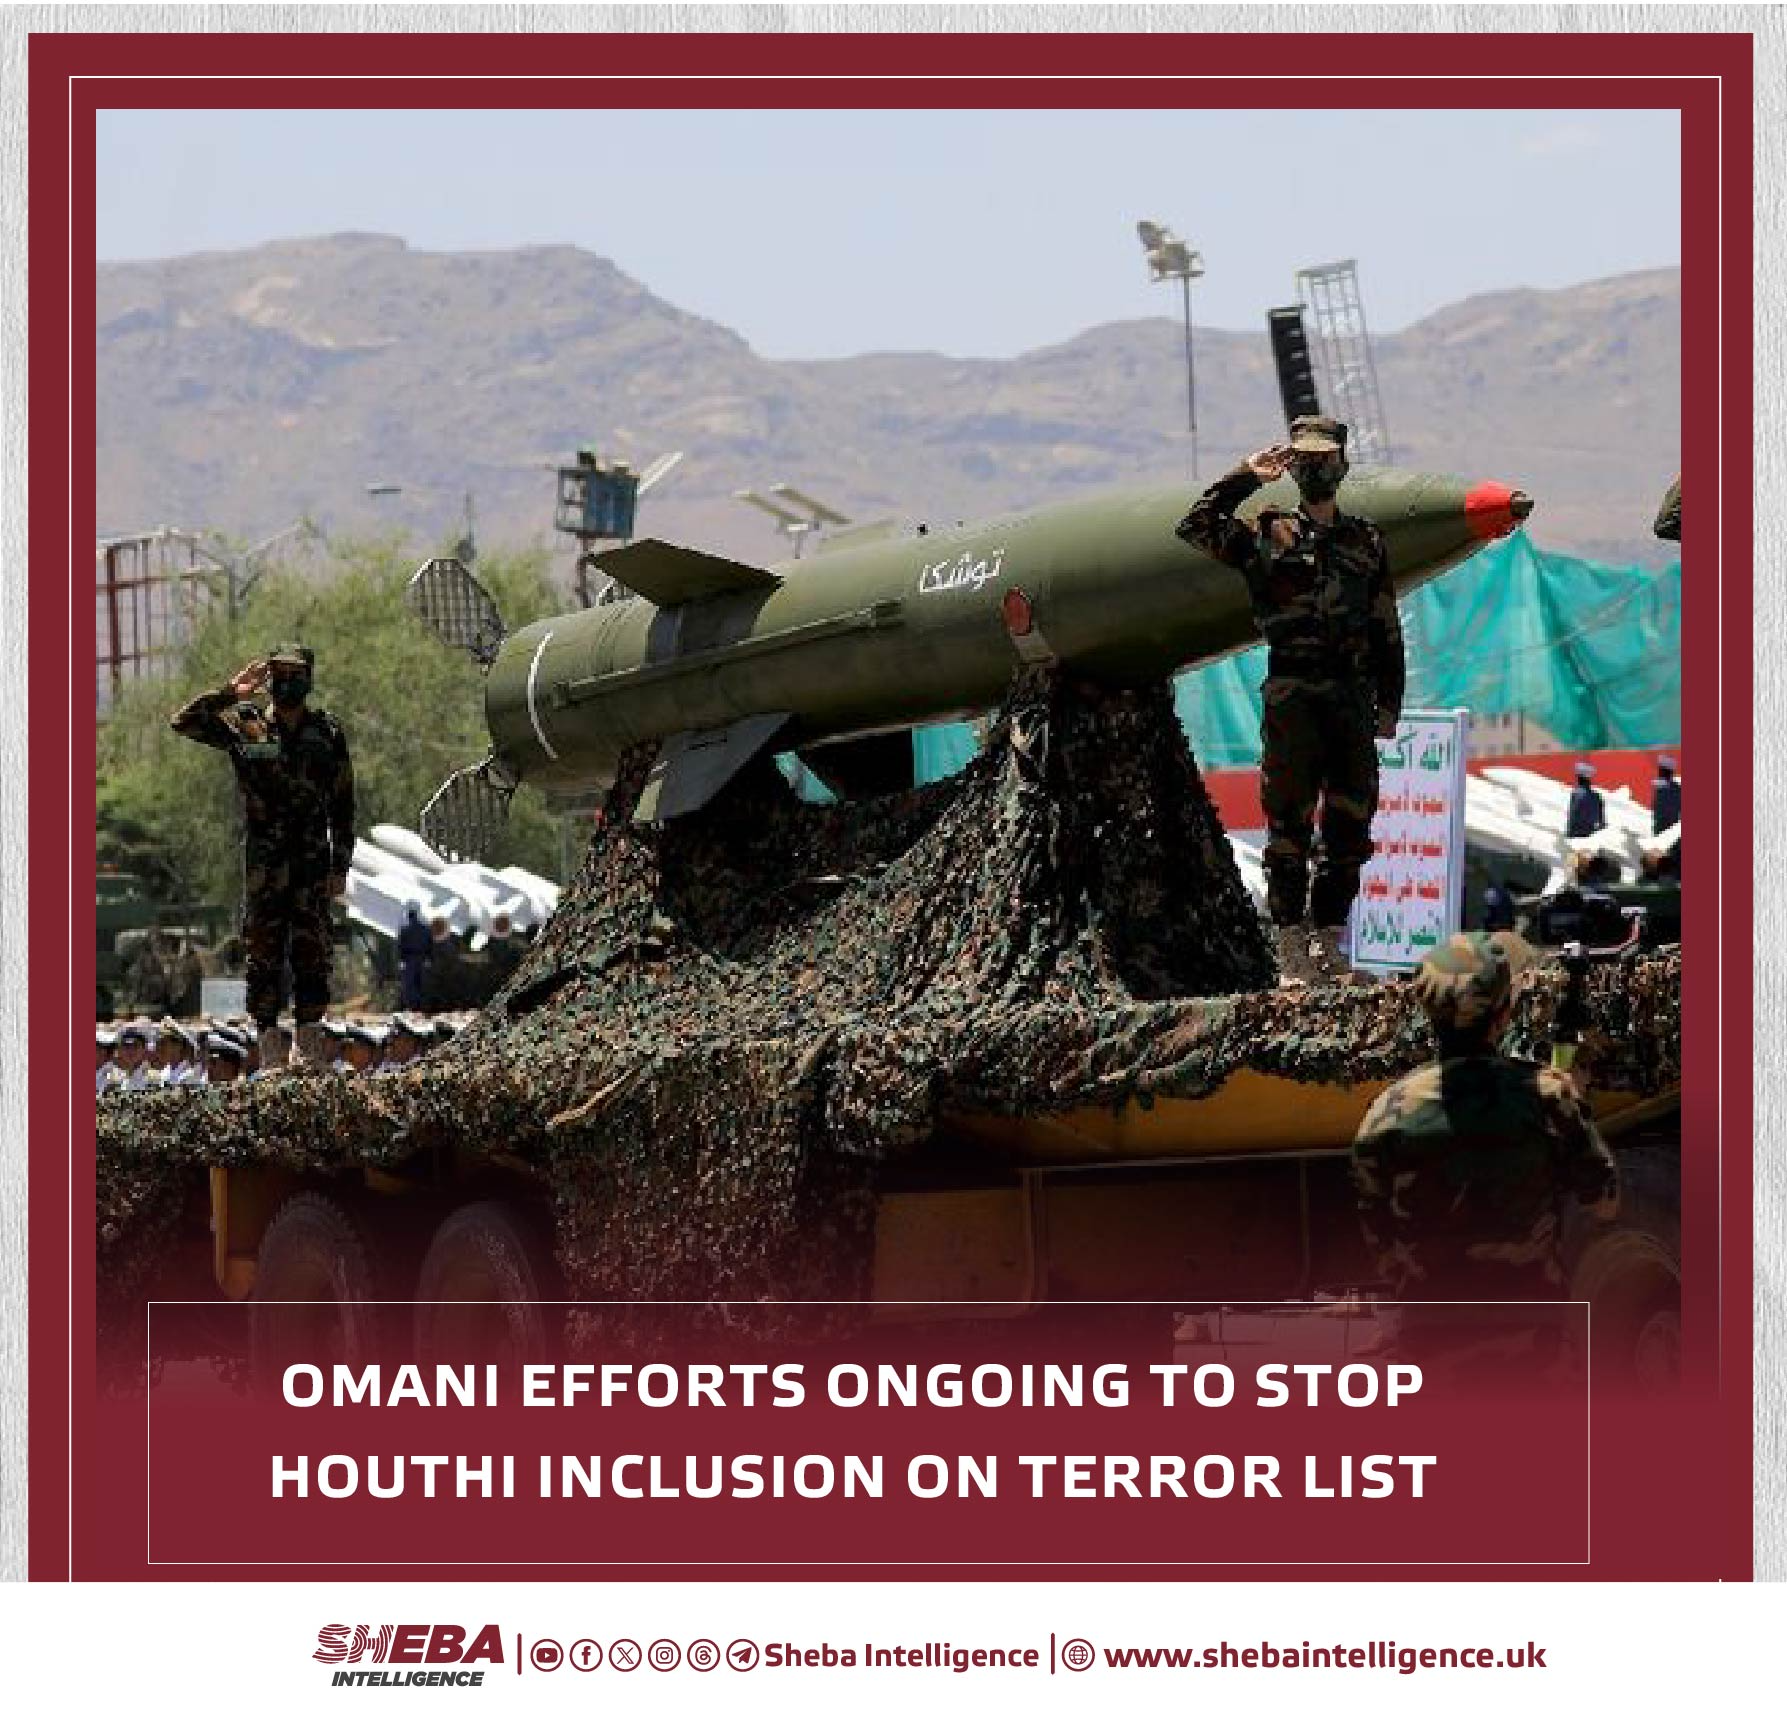 Omani Efforts Ongoing to Stop Houthi Inclusion on Terror List